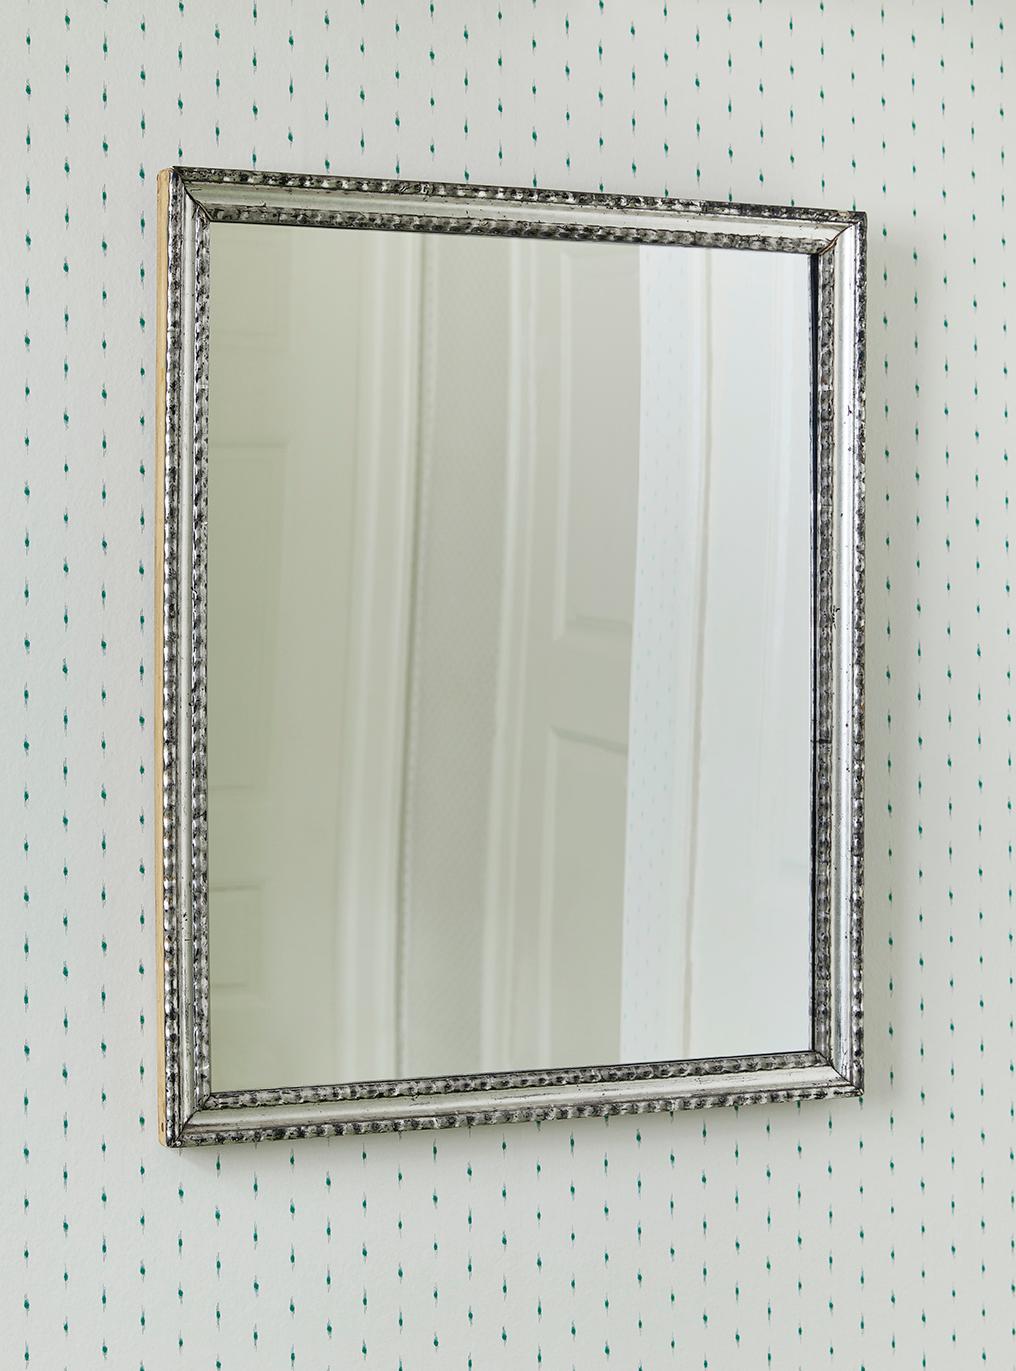 France, Late 19th Century

Mirror in antique frame. 

H 65 x W 53 x D 3 cm